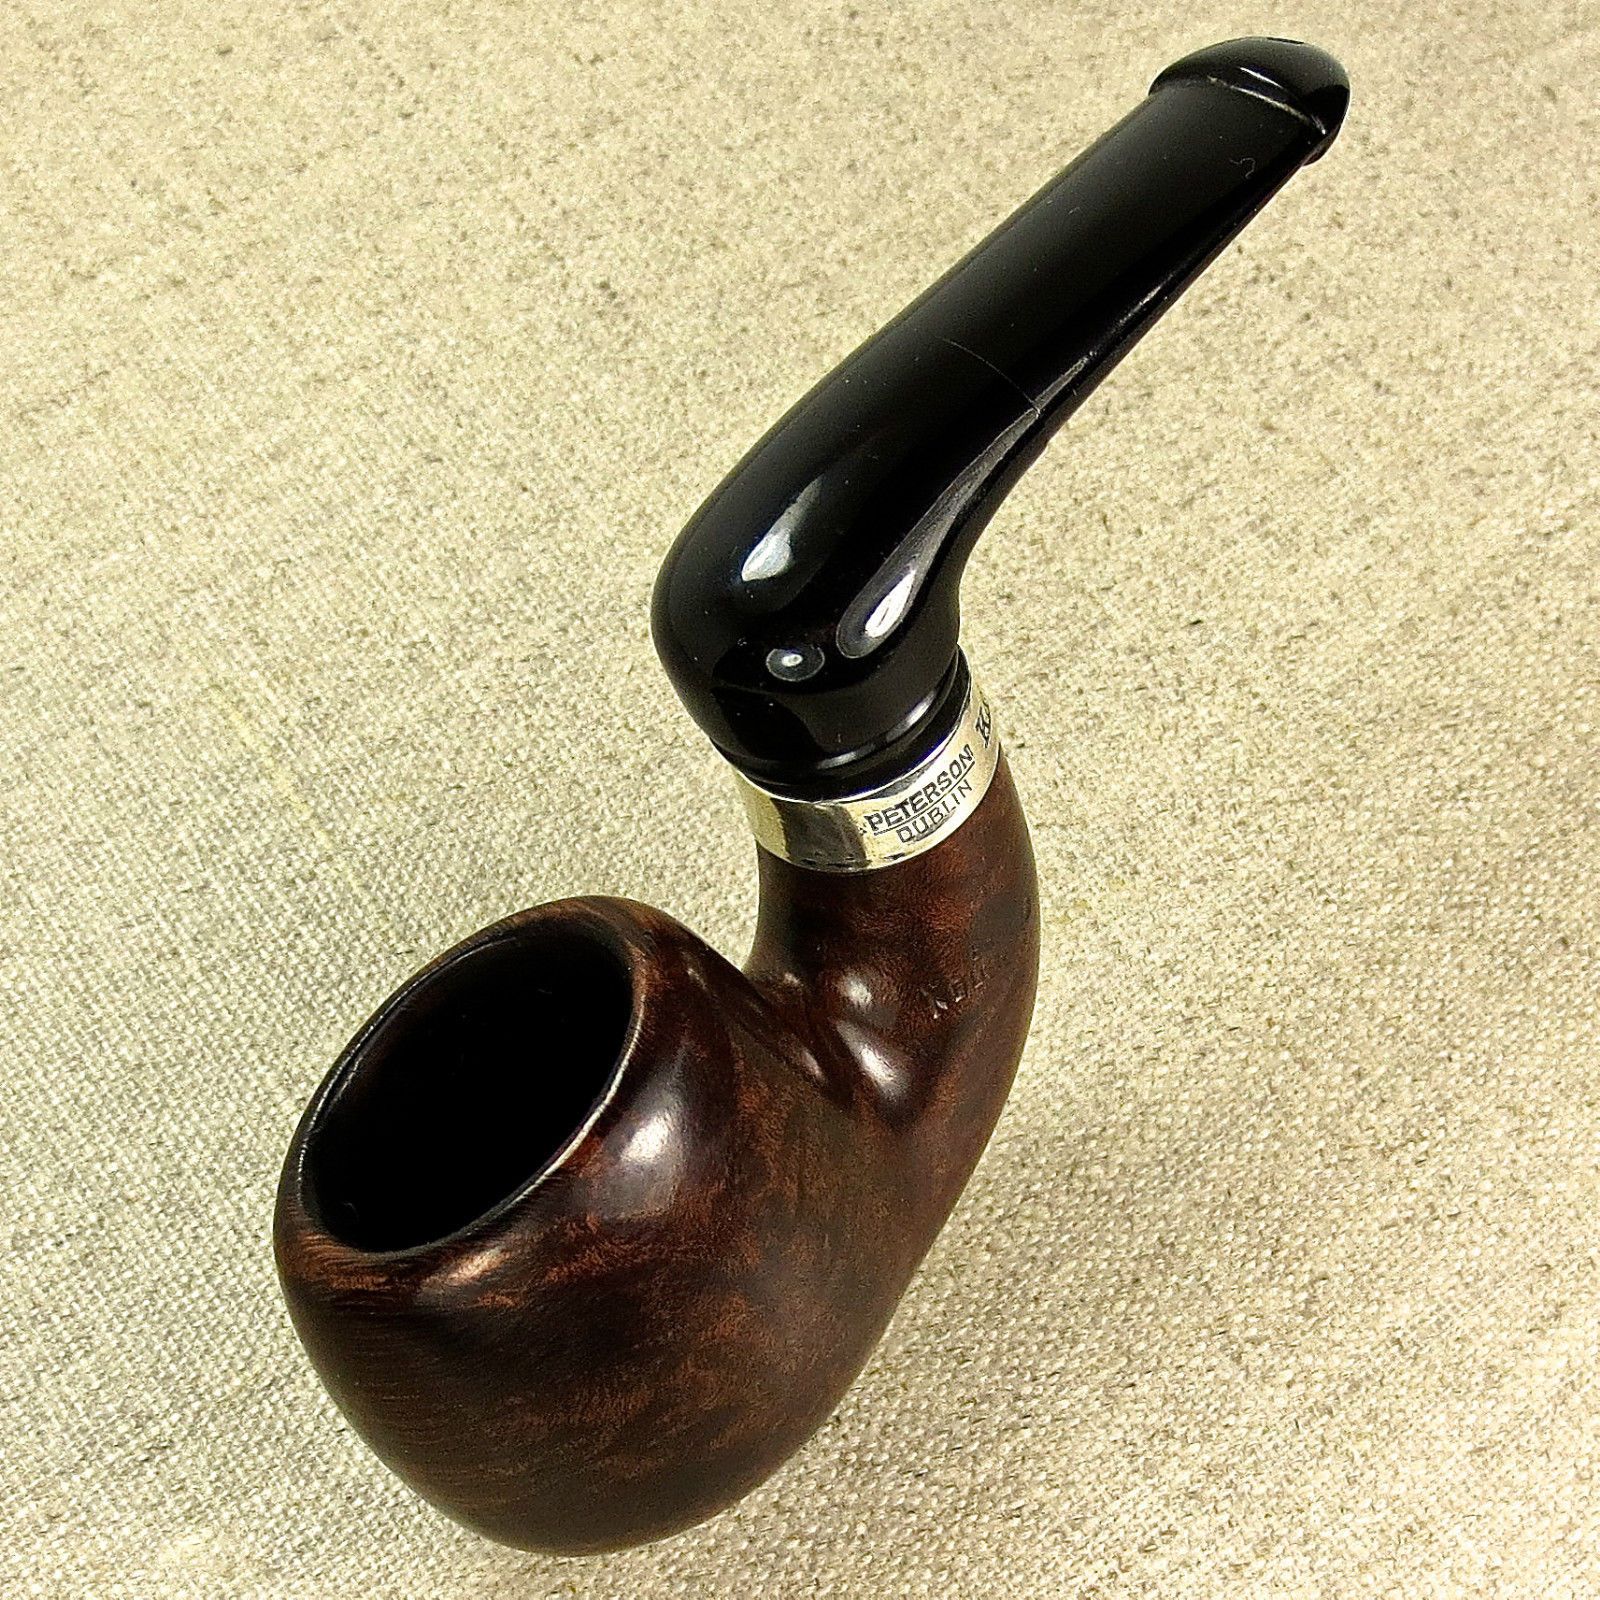 Musée de Pipes d'Amsterdam | Smoke | Pinterest | Pipes, Pipe smoking ...